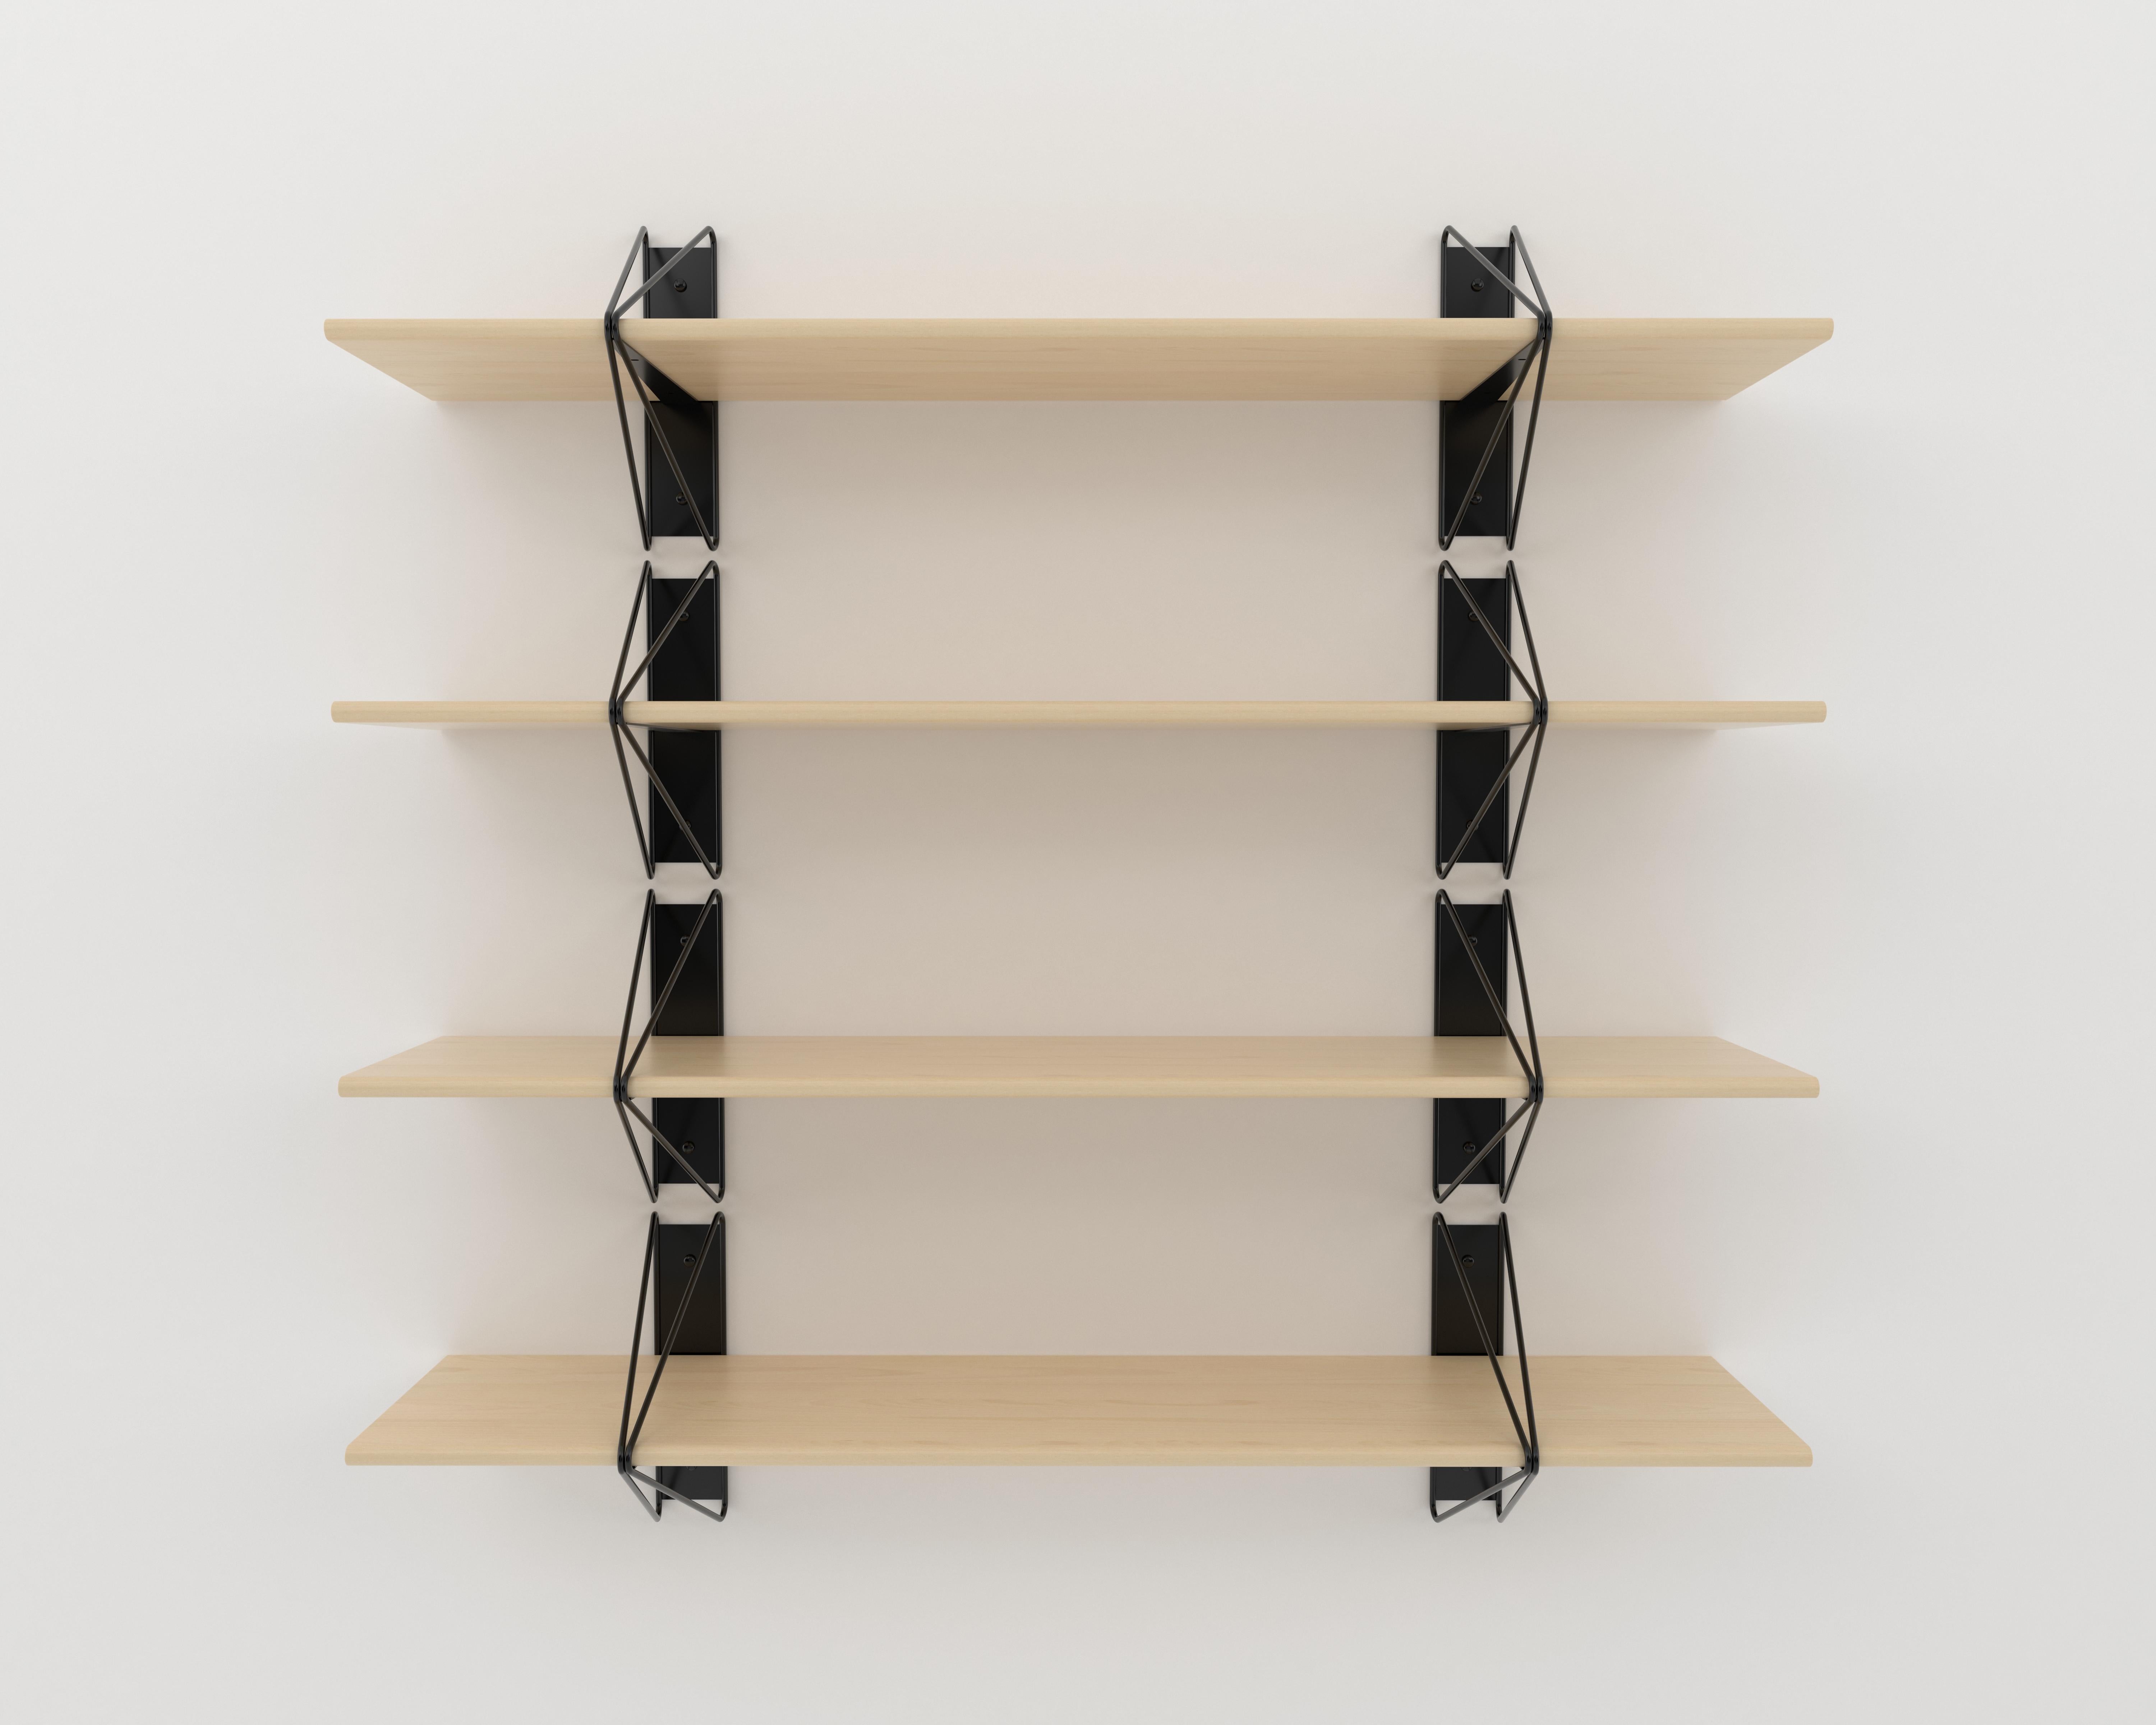 Oiled Set of 4 Strut Shelves from Souda, 84in, Black and Maple, Made to Order For Sale